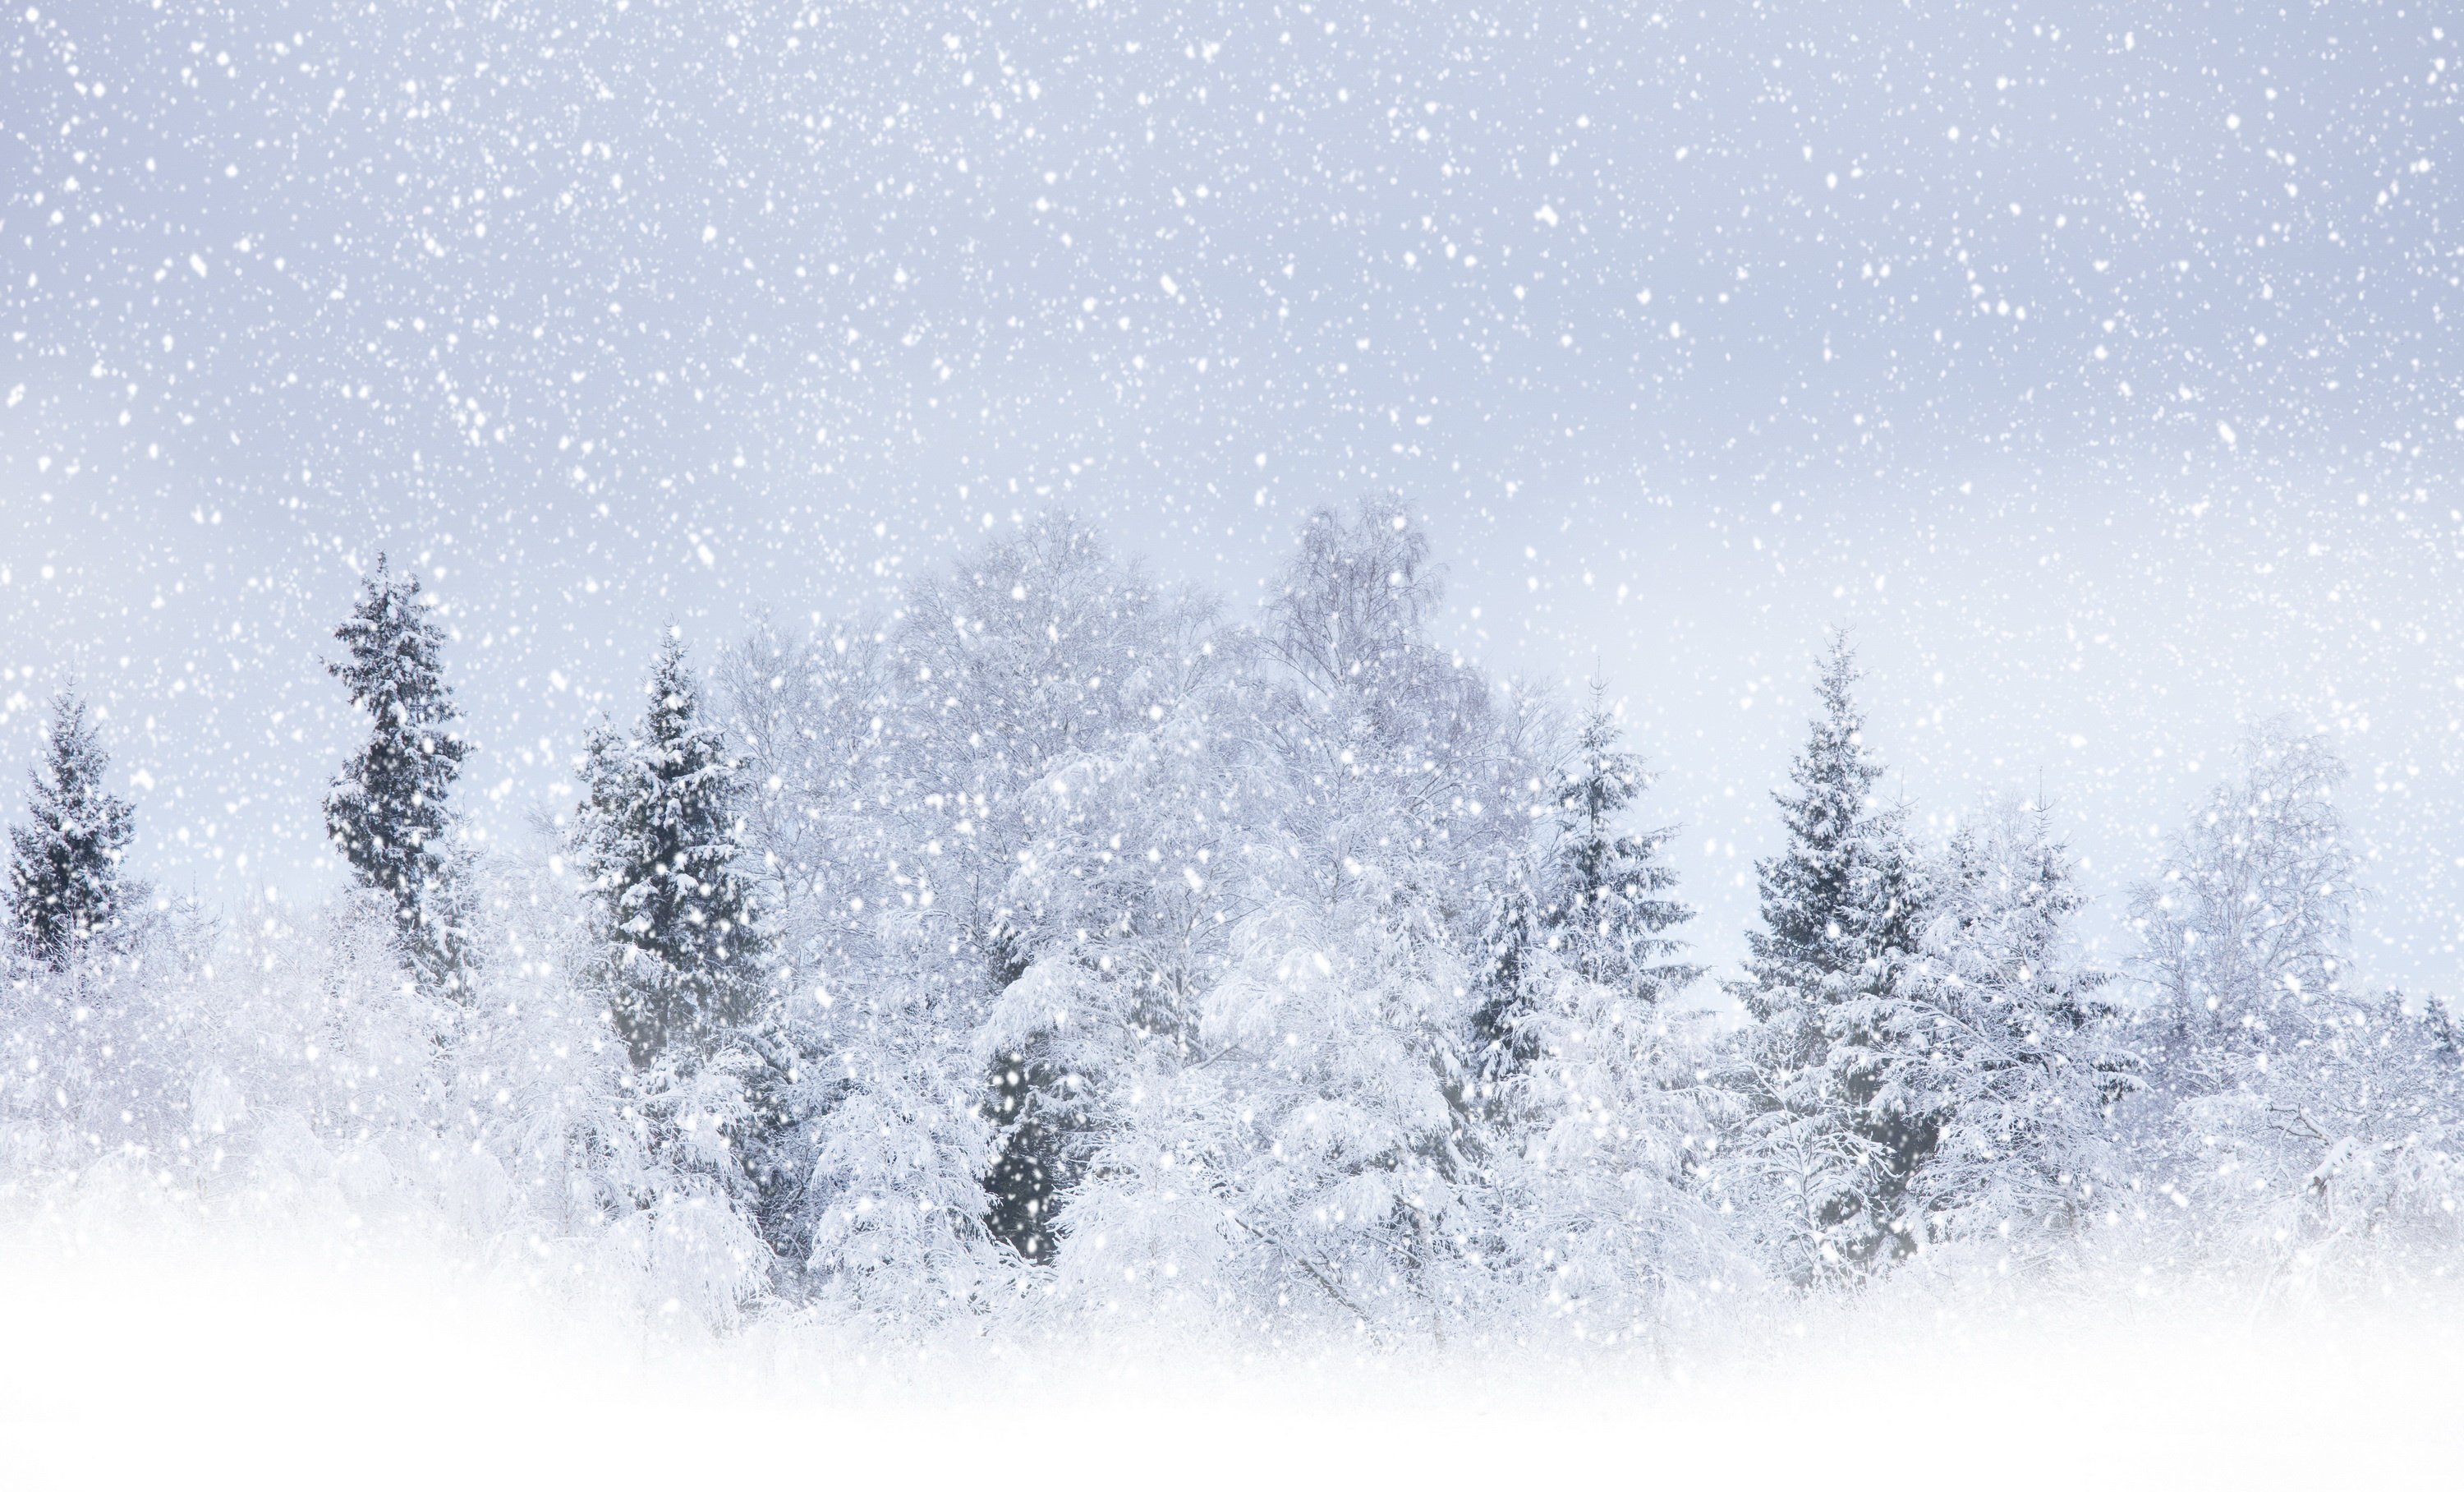 5 Things To Do During A Snow Storm